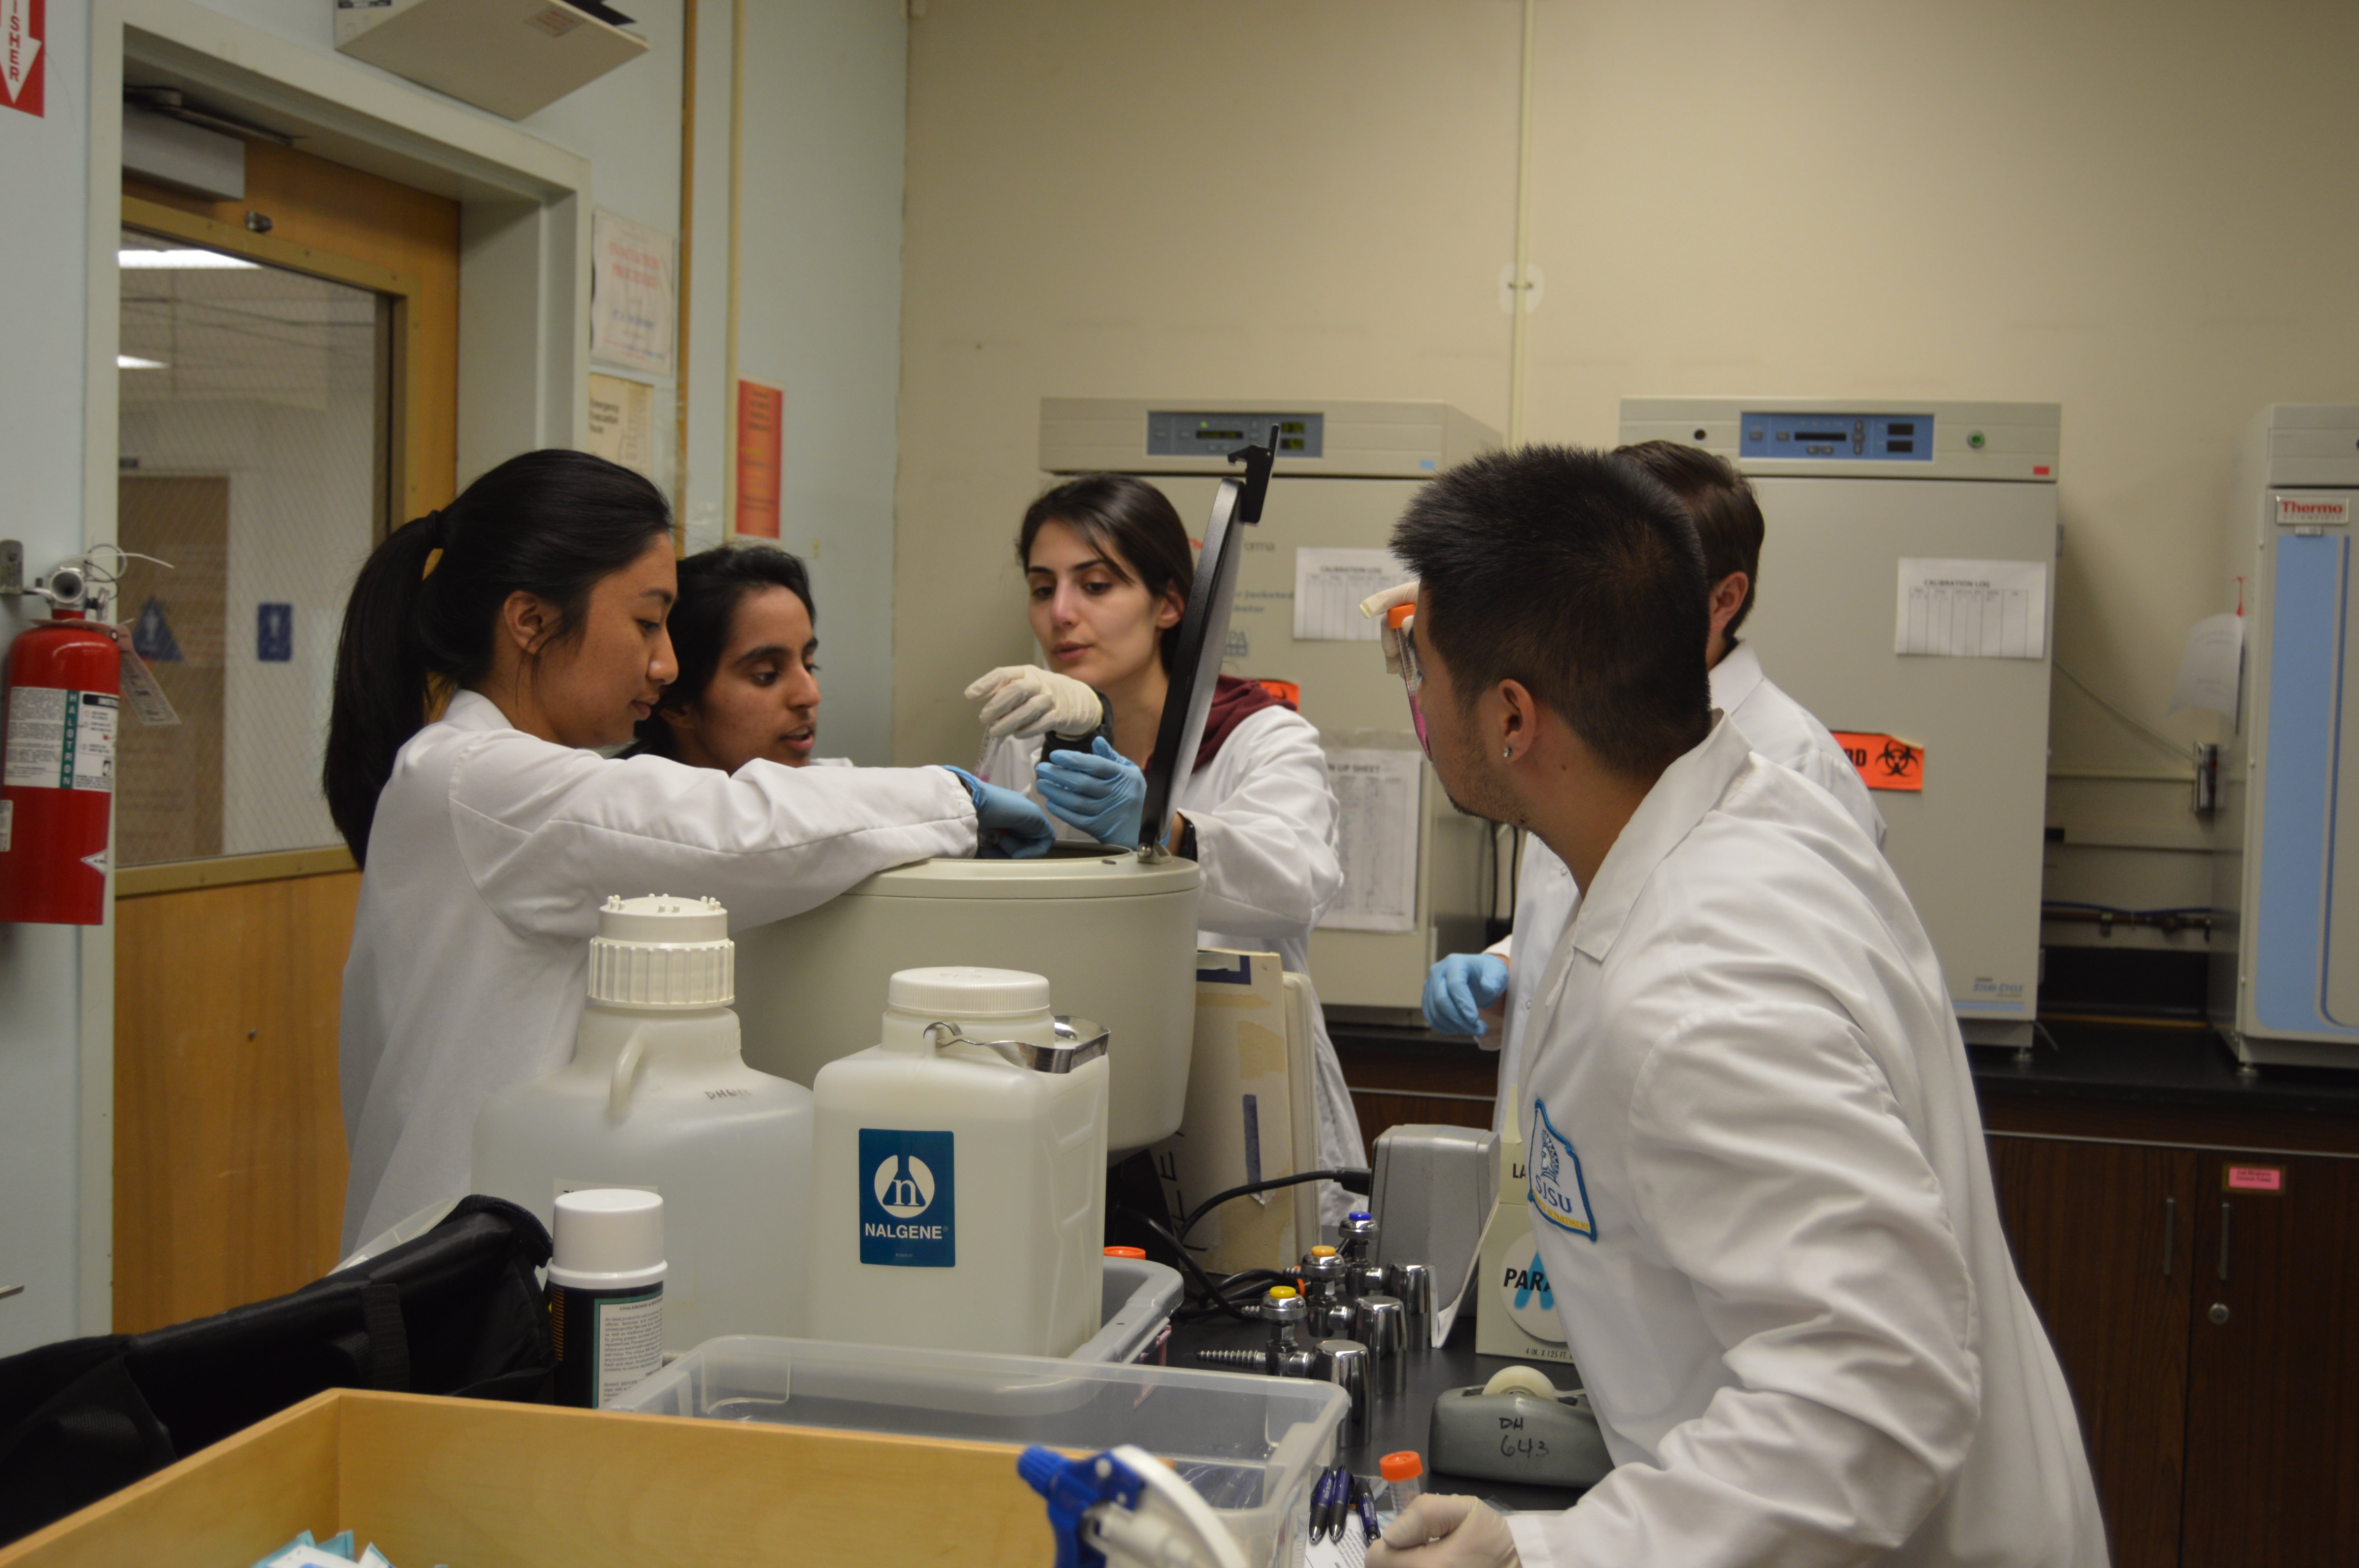 A group of students, some wearing lab coats